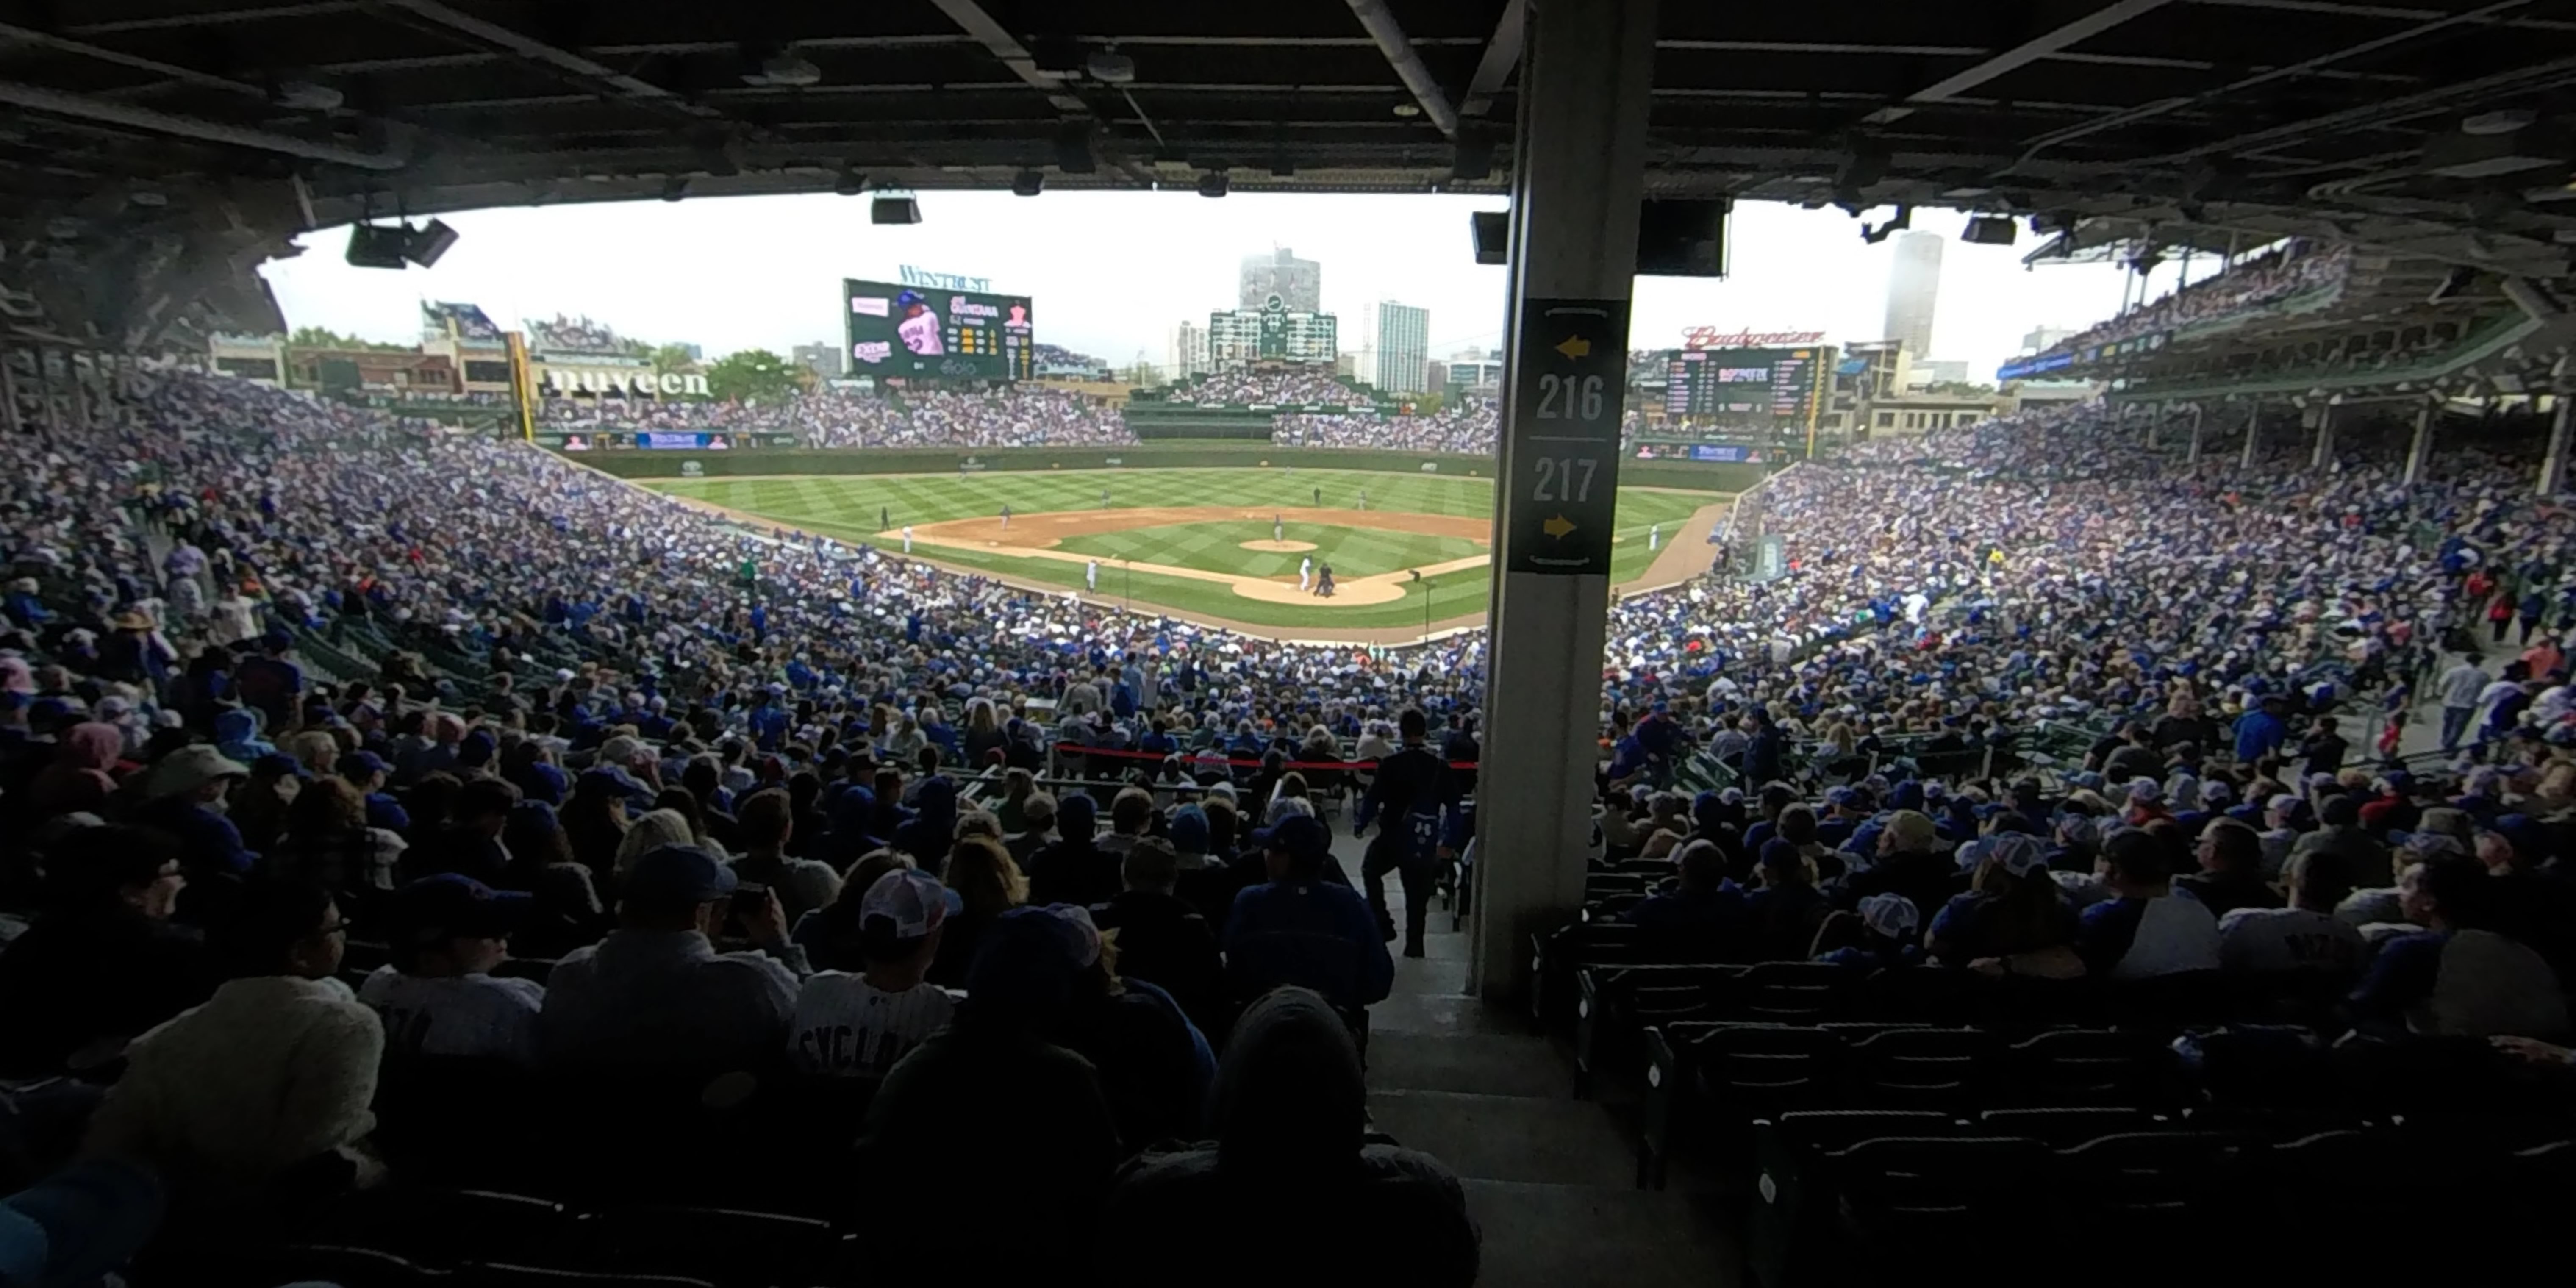 section 216 panoramic seat view  for baseball - wrigley field